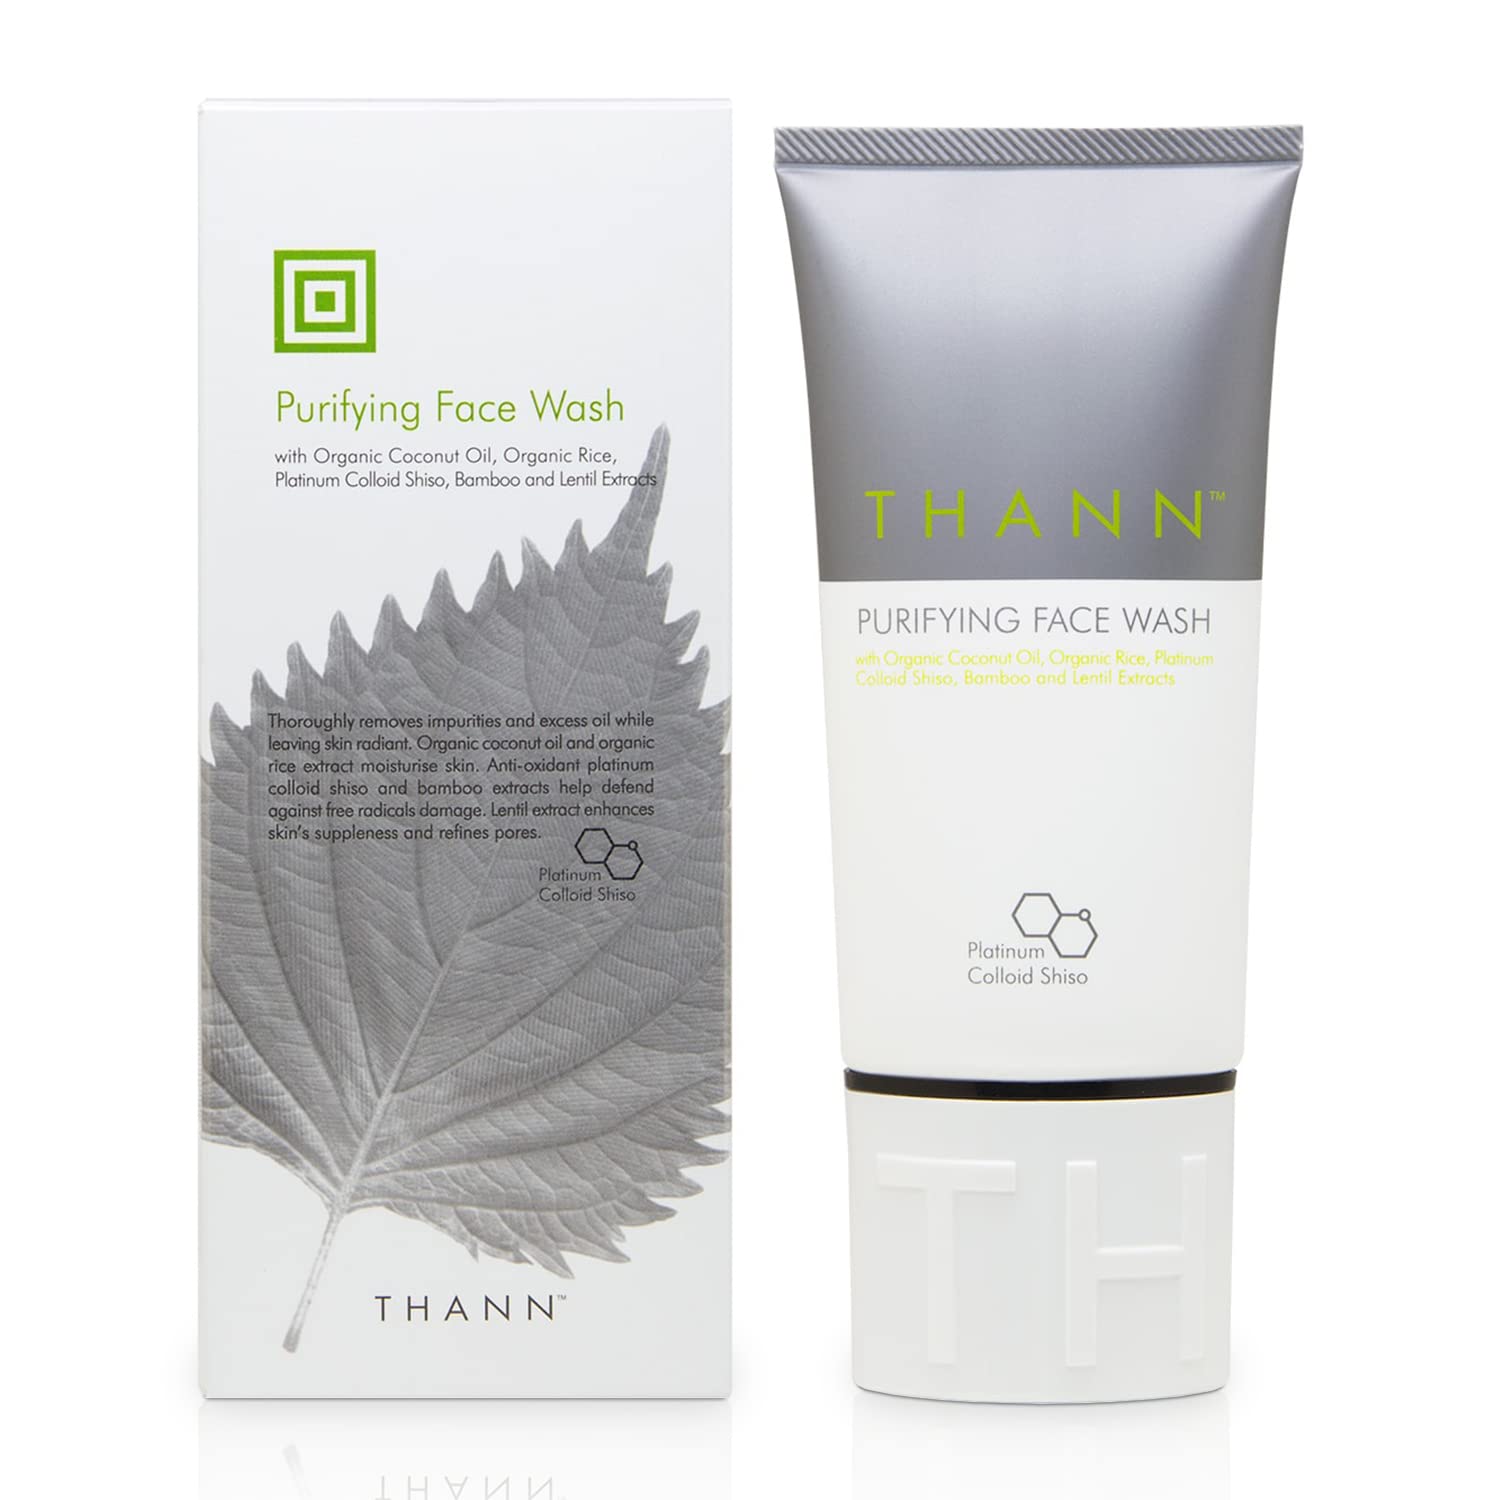 Thann Purifying Face Wash, Plant-based Facial Skin Care Products for Women and Men with Organic Coconut Oil, Rice and Shiso Leaf Extracts to Cleanse and Refine Pores for Radiant Skin (5.1 fl oz)